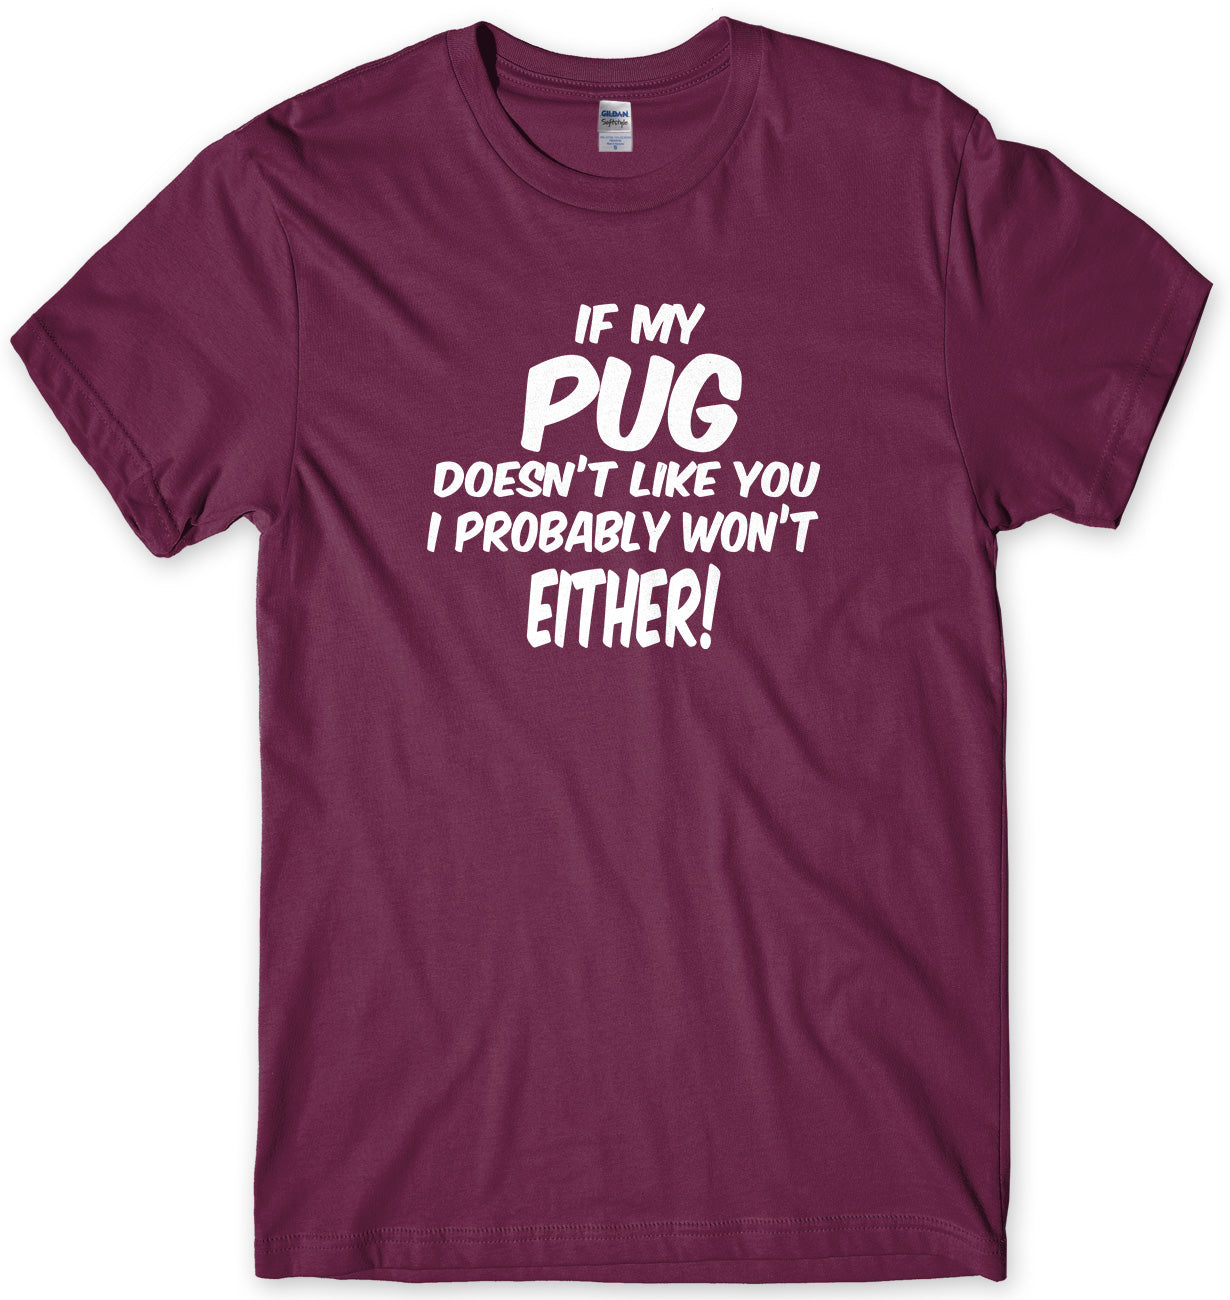 IF MY PUG DOESN'T LIKE YOU I PROBABLY WON'T EITHER MENS FUNNY SLOGAN UNISEX T-SHIRT